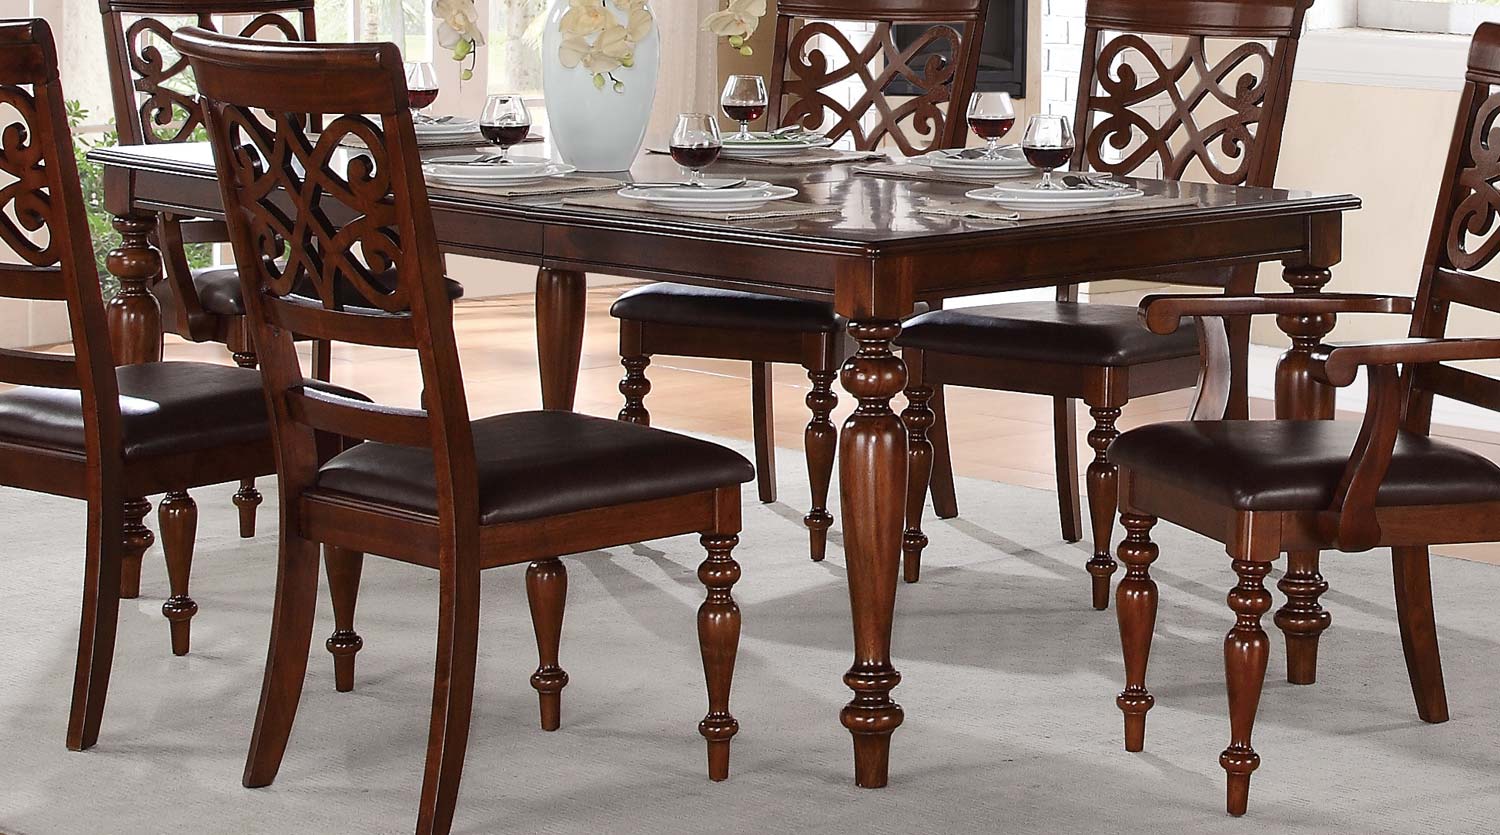 Homelegance Creswell Leg Dining Table with Leaf - Rich Cherry